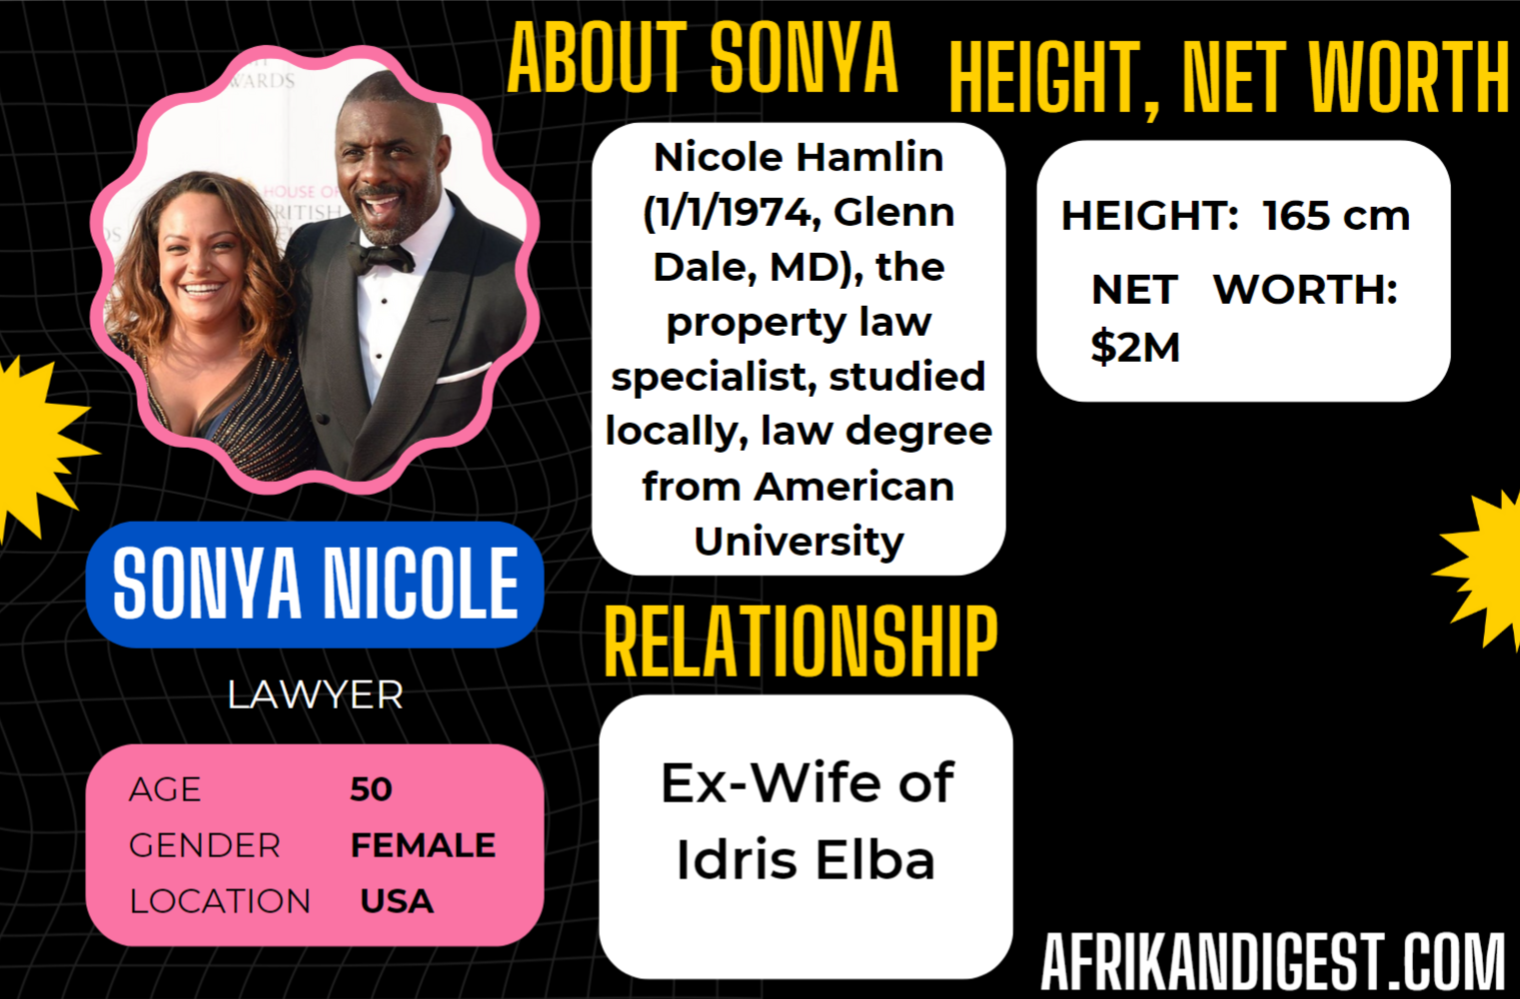 Sonya, Idris's ex-wife: key facts in an infographic